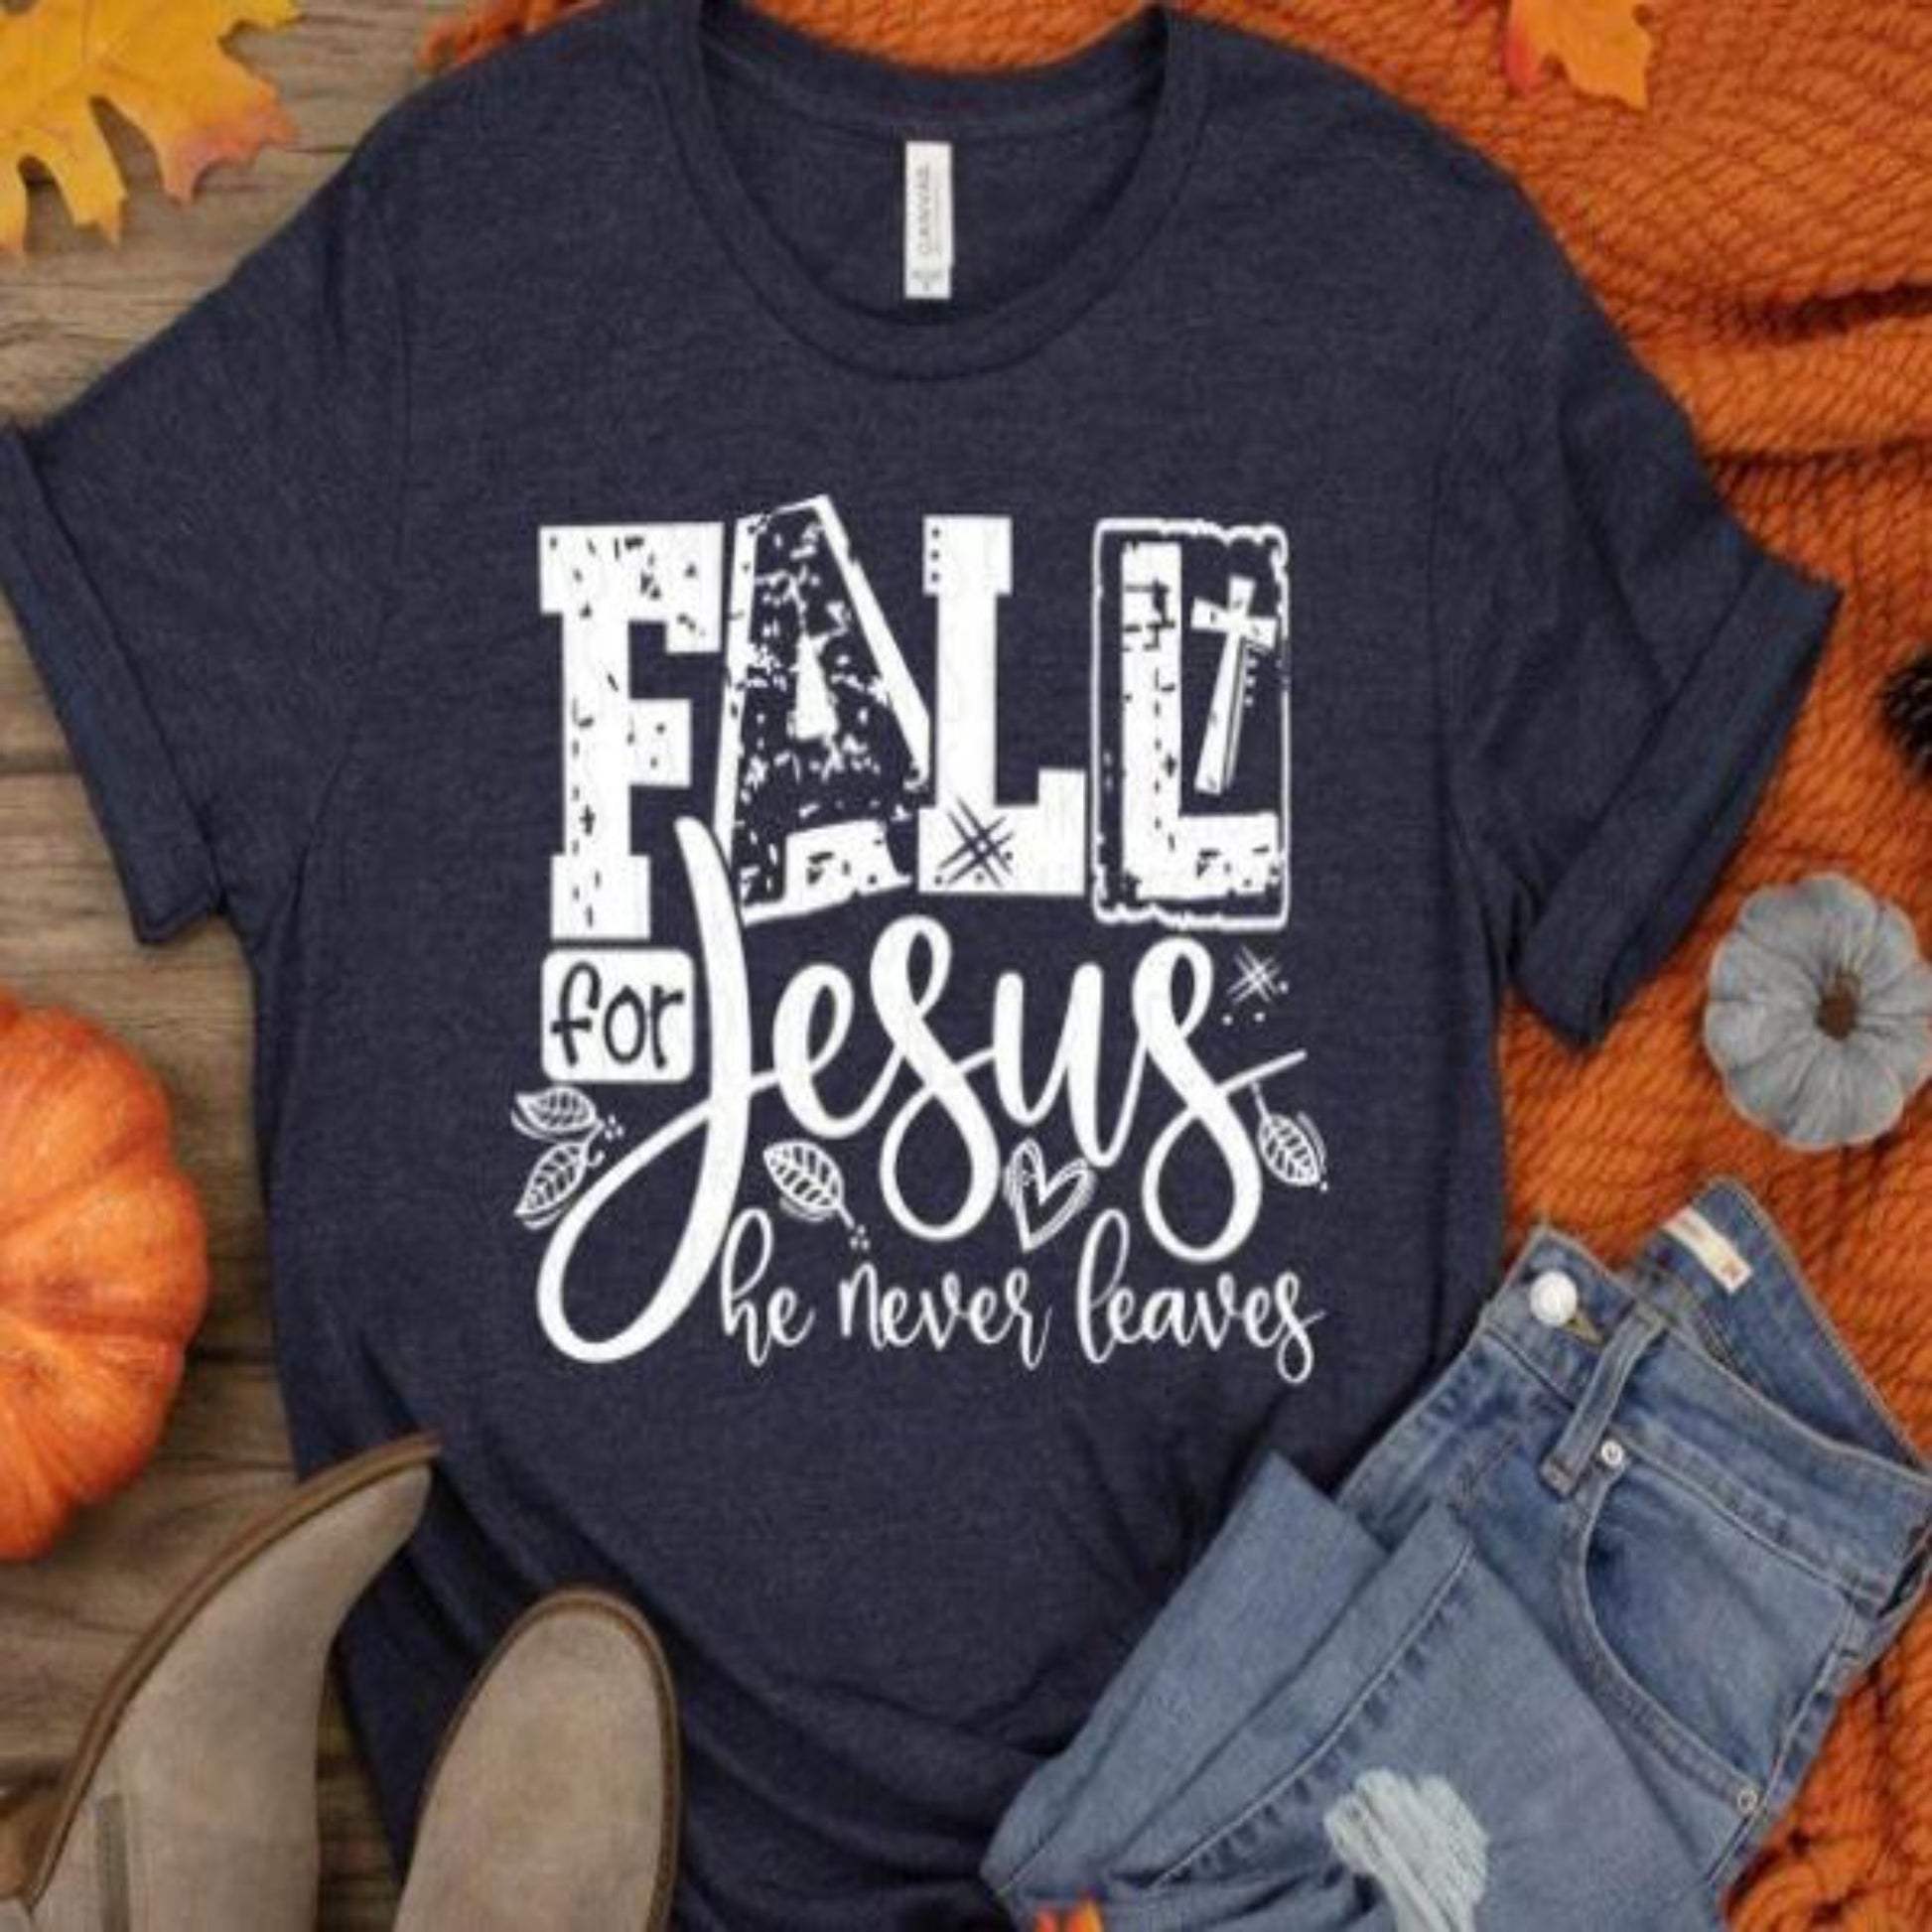 fall_for_Jesus specialty tee wear Jesus everyday shirt comfortable faith-based tshirt